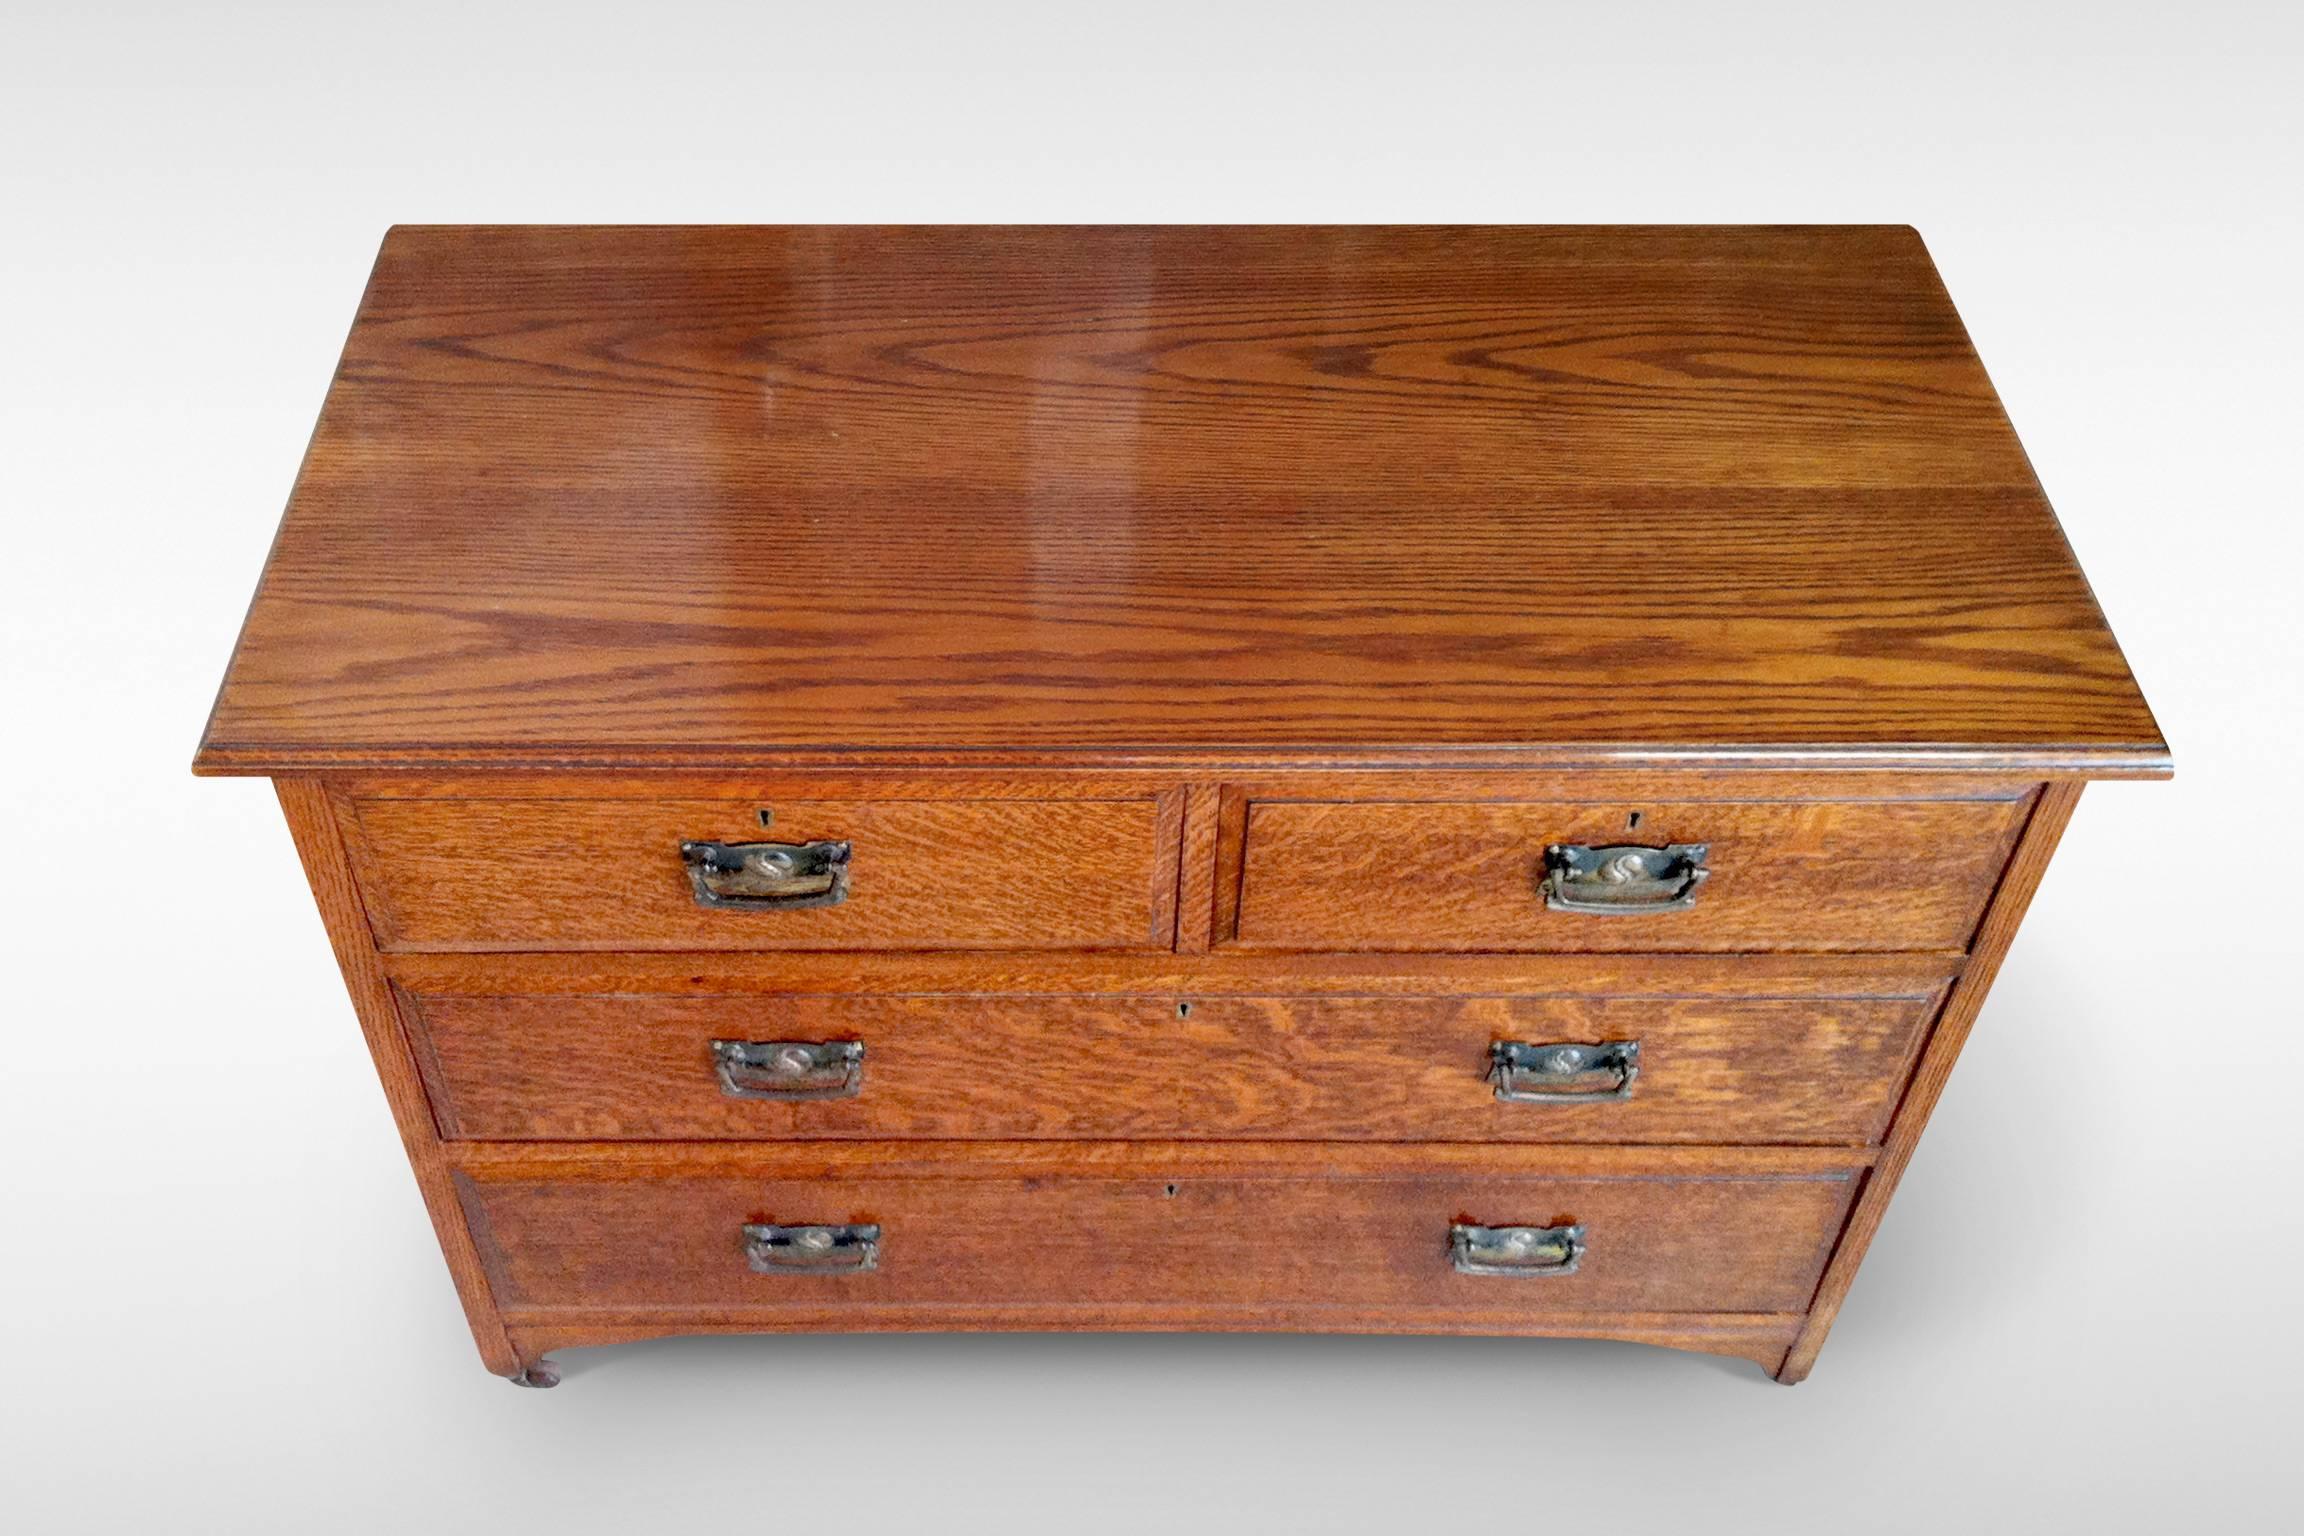 A usefully compact Arts and Crafts chest of drawers in oak, the drawer fronts quarter-sawn with particularly fine figuring. There are two long and two short drawers and the handle plates have a repousse-work motif of stylised pomegranate. The